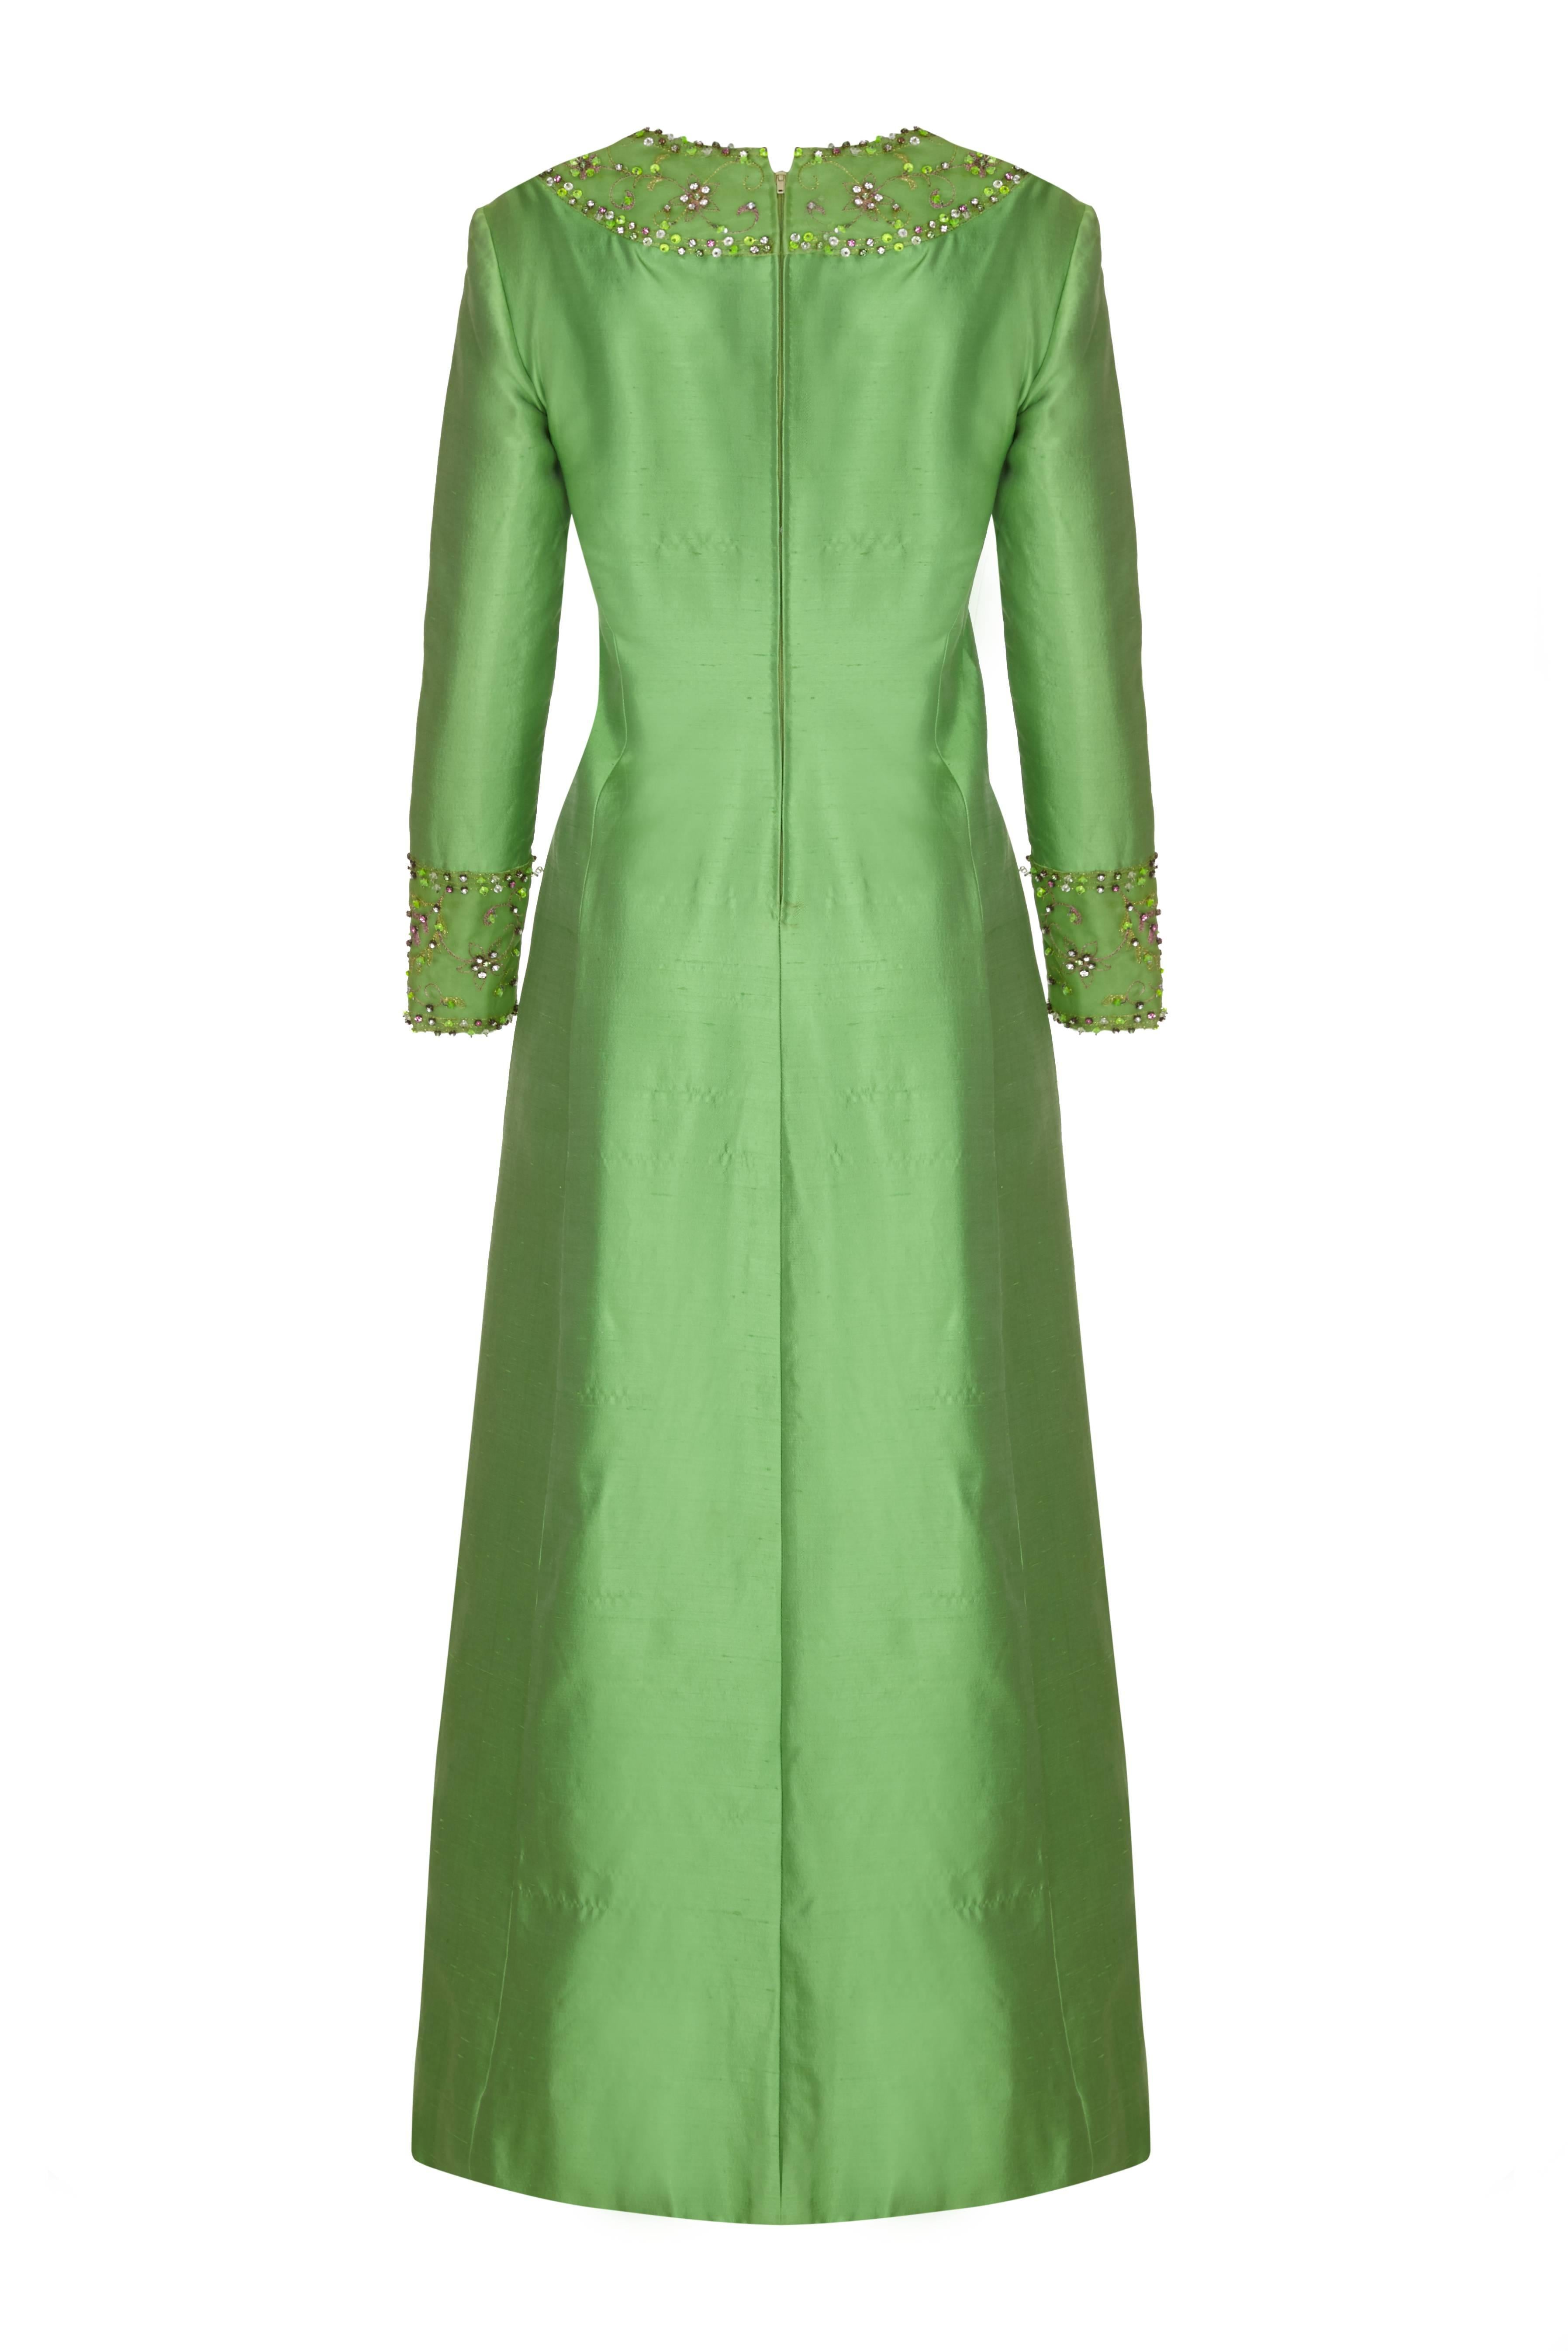 This stunning full length silk vintage dress in emerald green is by American label Gino Charles for Malcolm Starr and is of superb quality. This opulent piece has intricate beading with prong set rhinestone embellishment in green, pink and crystal